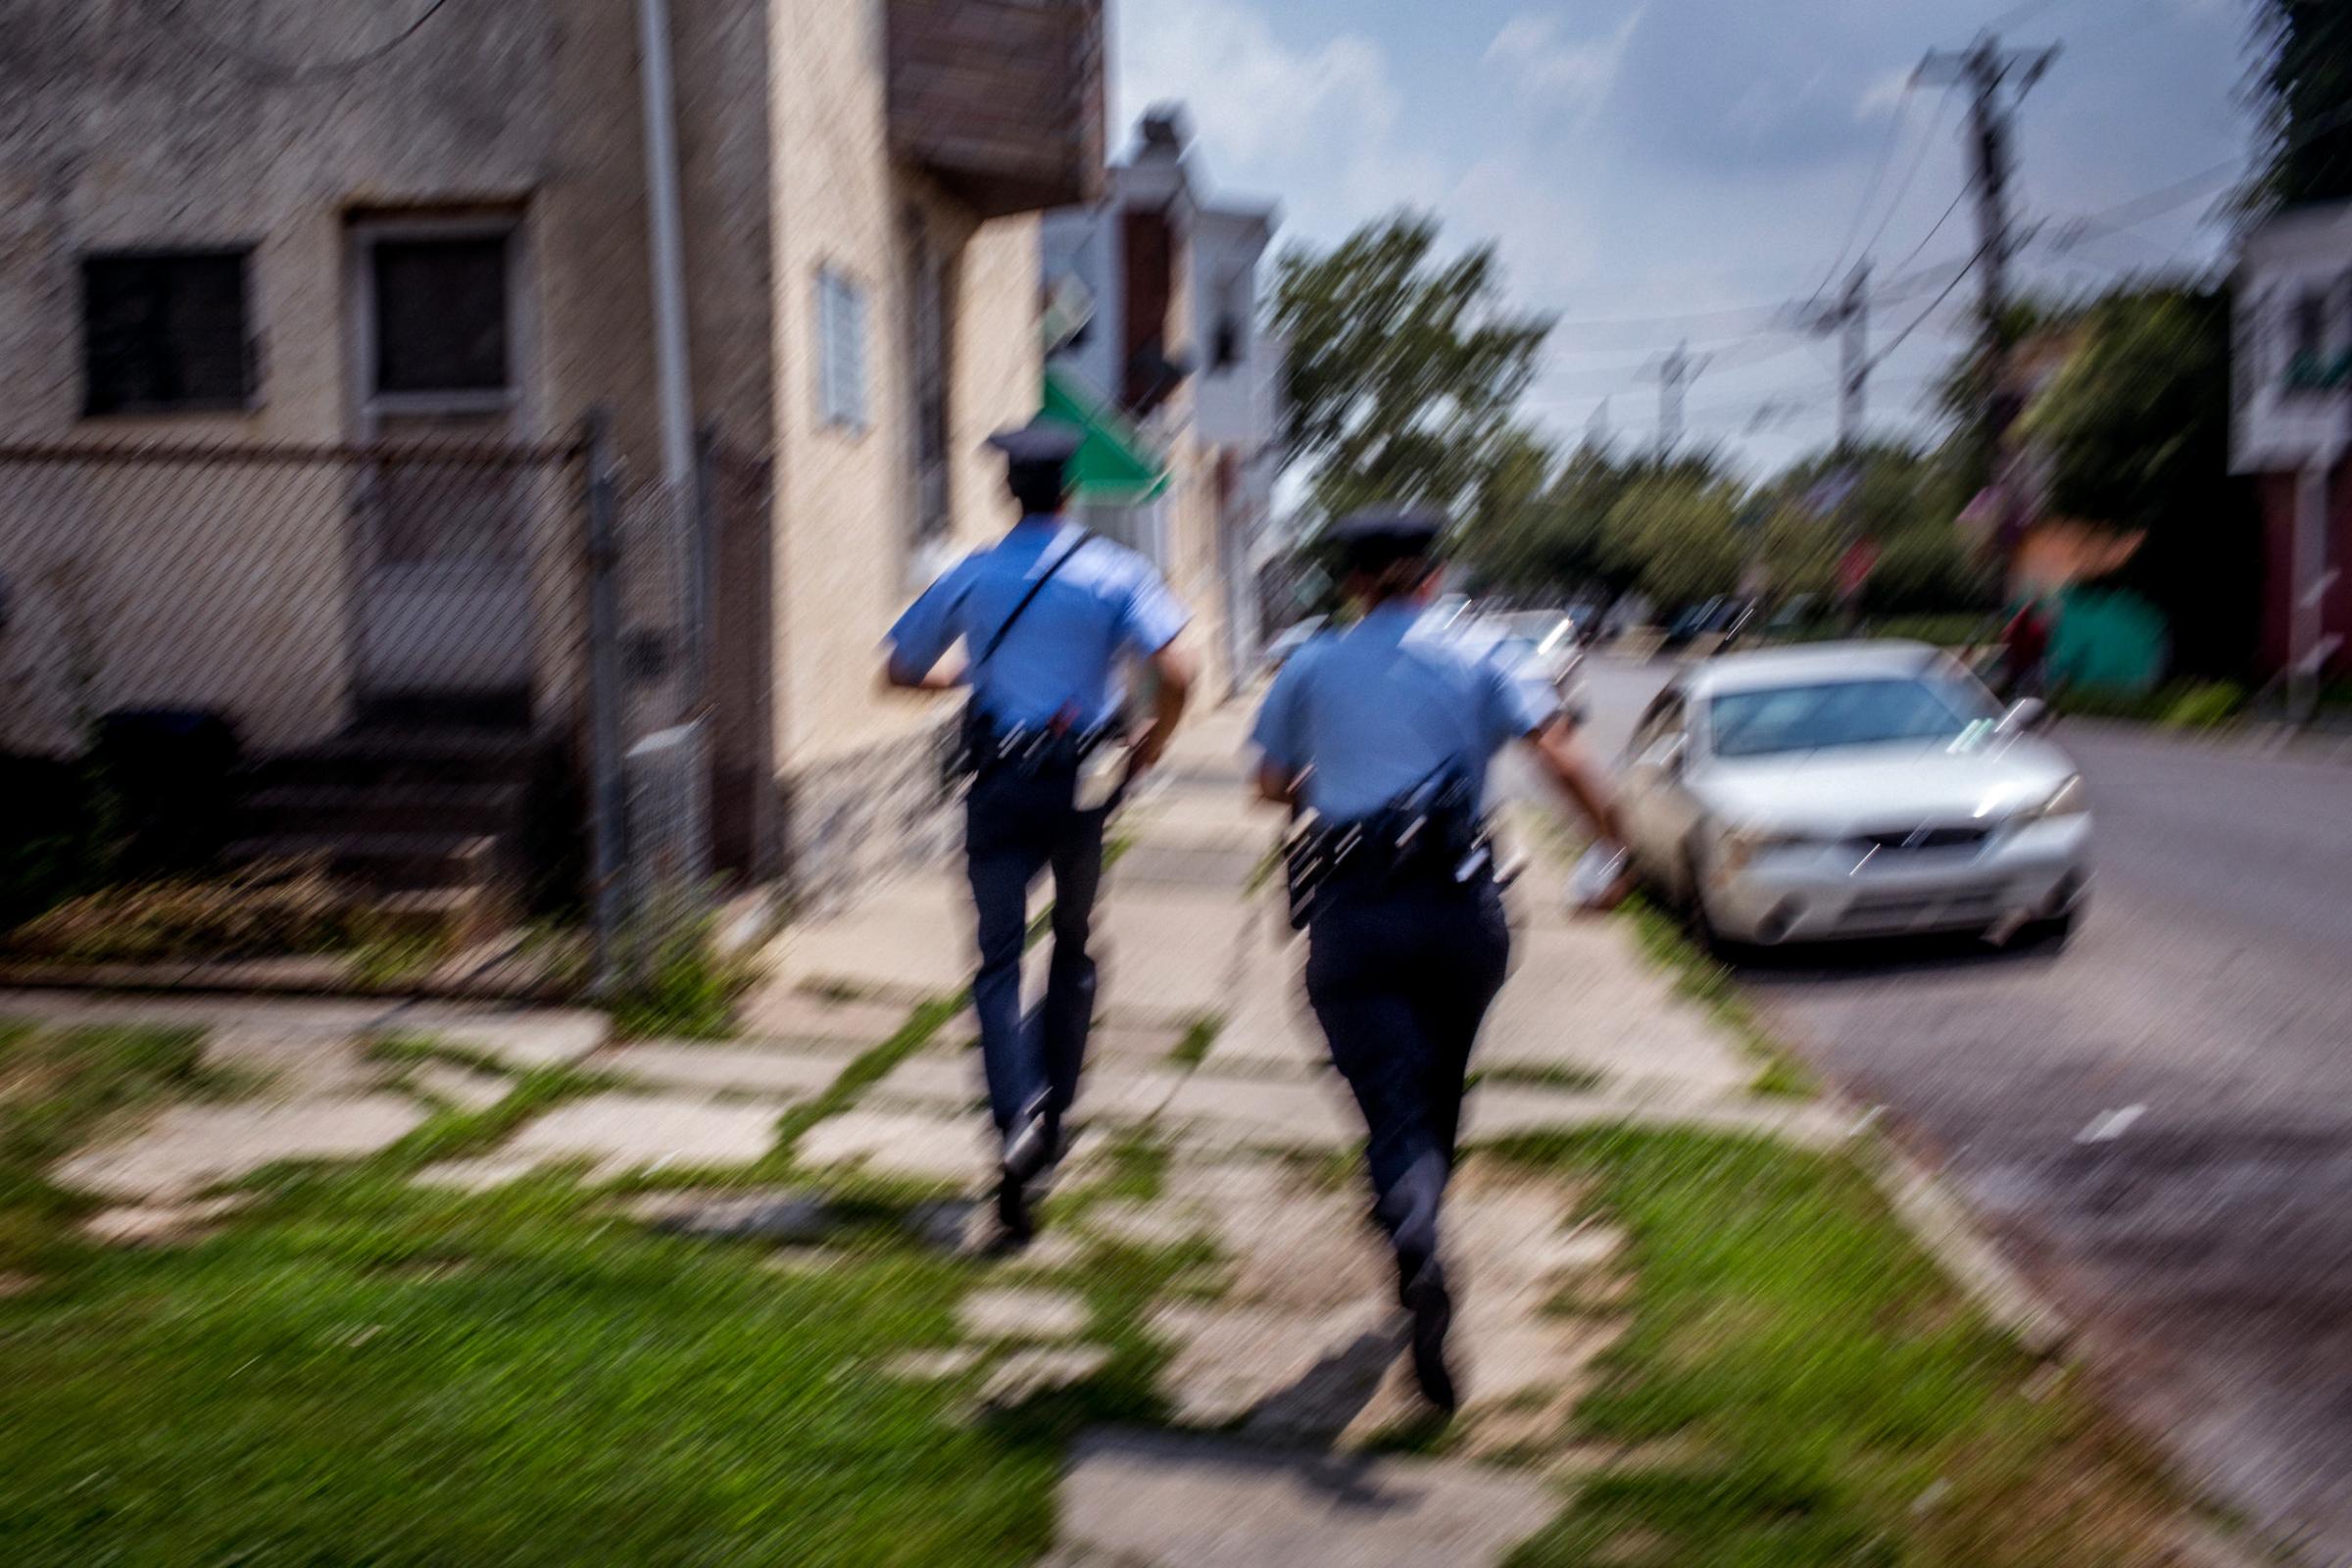 July 28th, 2015. Philadelphia, PA. First year "foot beat" officers Jonathan Dedos (left) and Ashley Sipos (right) run down the street in West Philadelphia after a radio call comes in that someone has been shot in a nearby housing complex.(Natalie Keyssar)